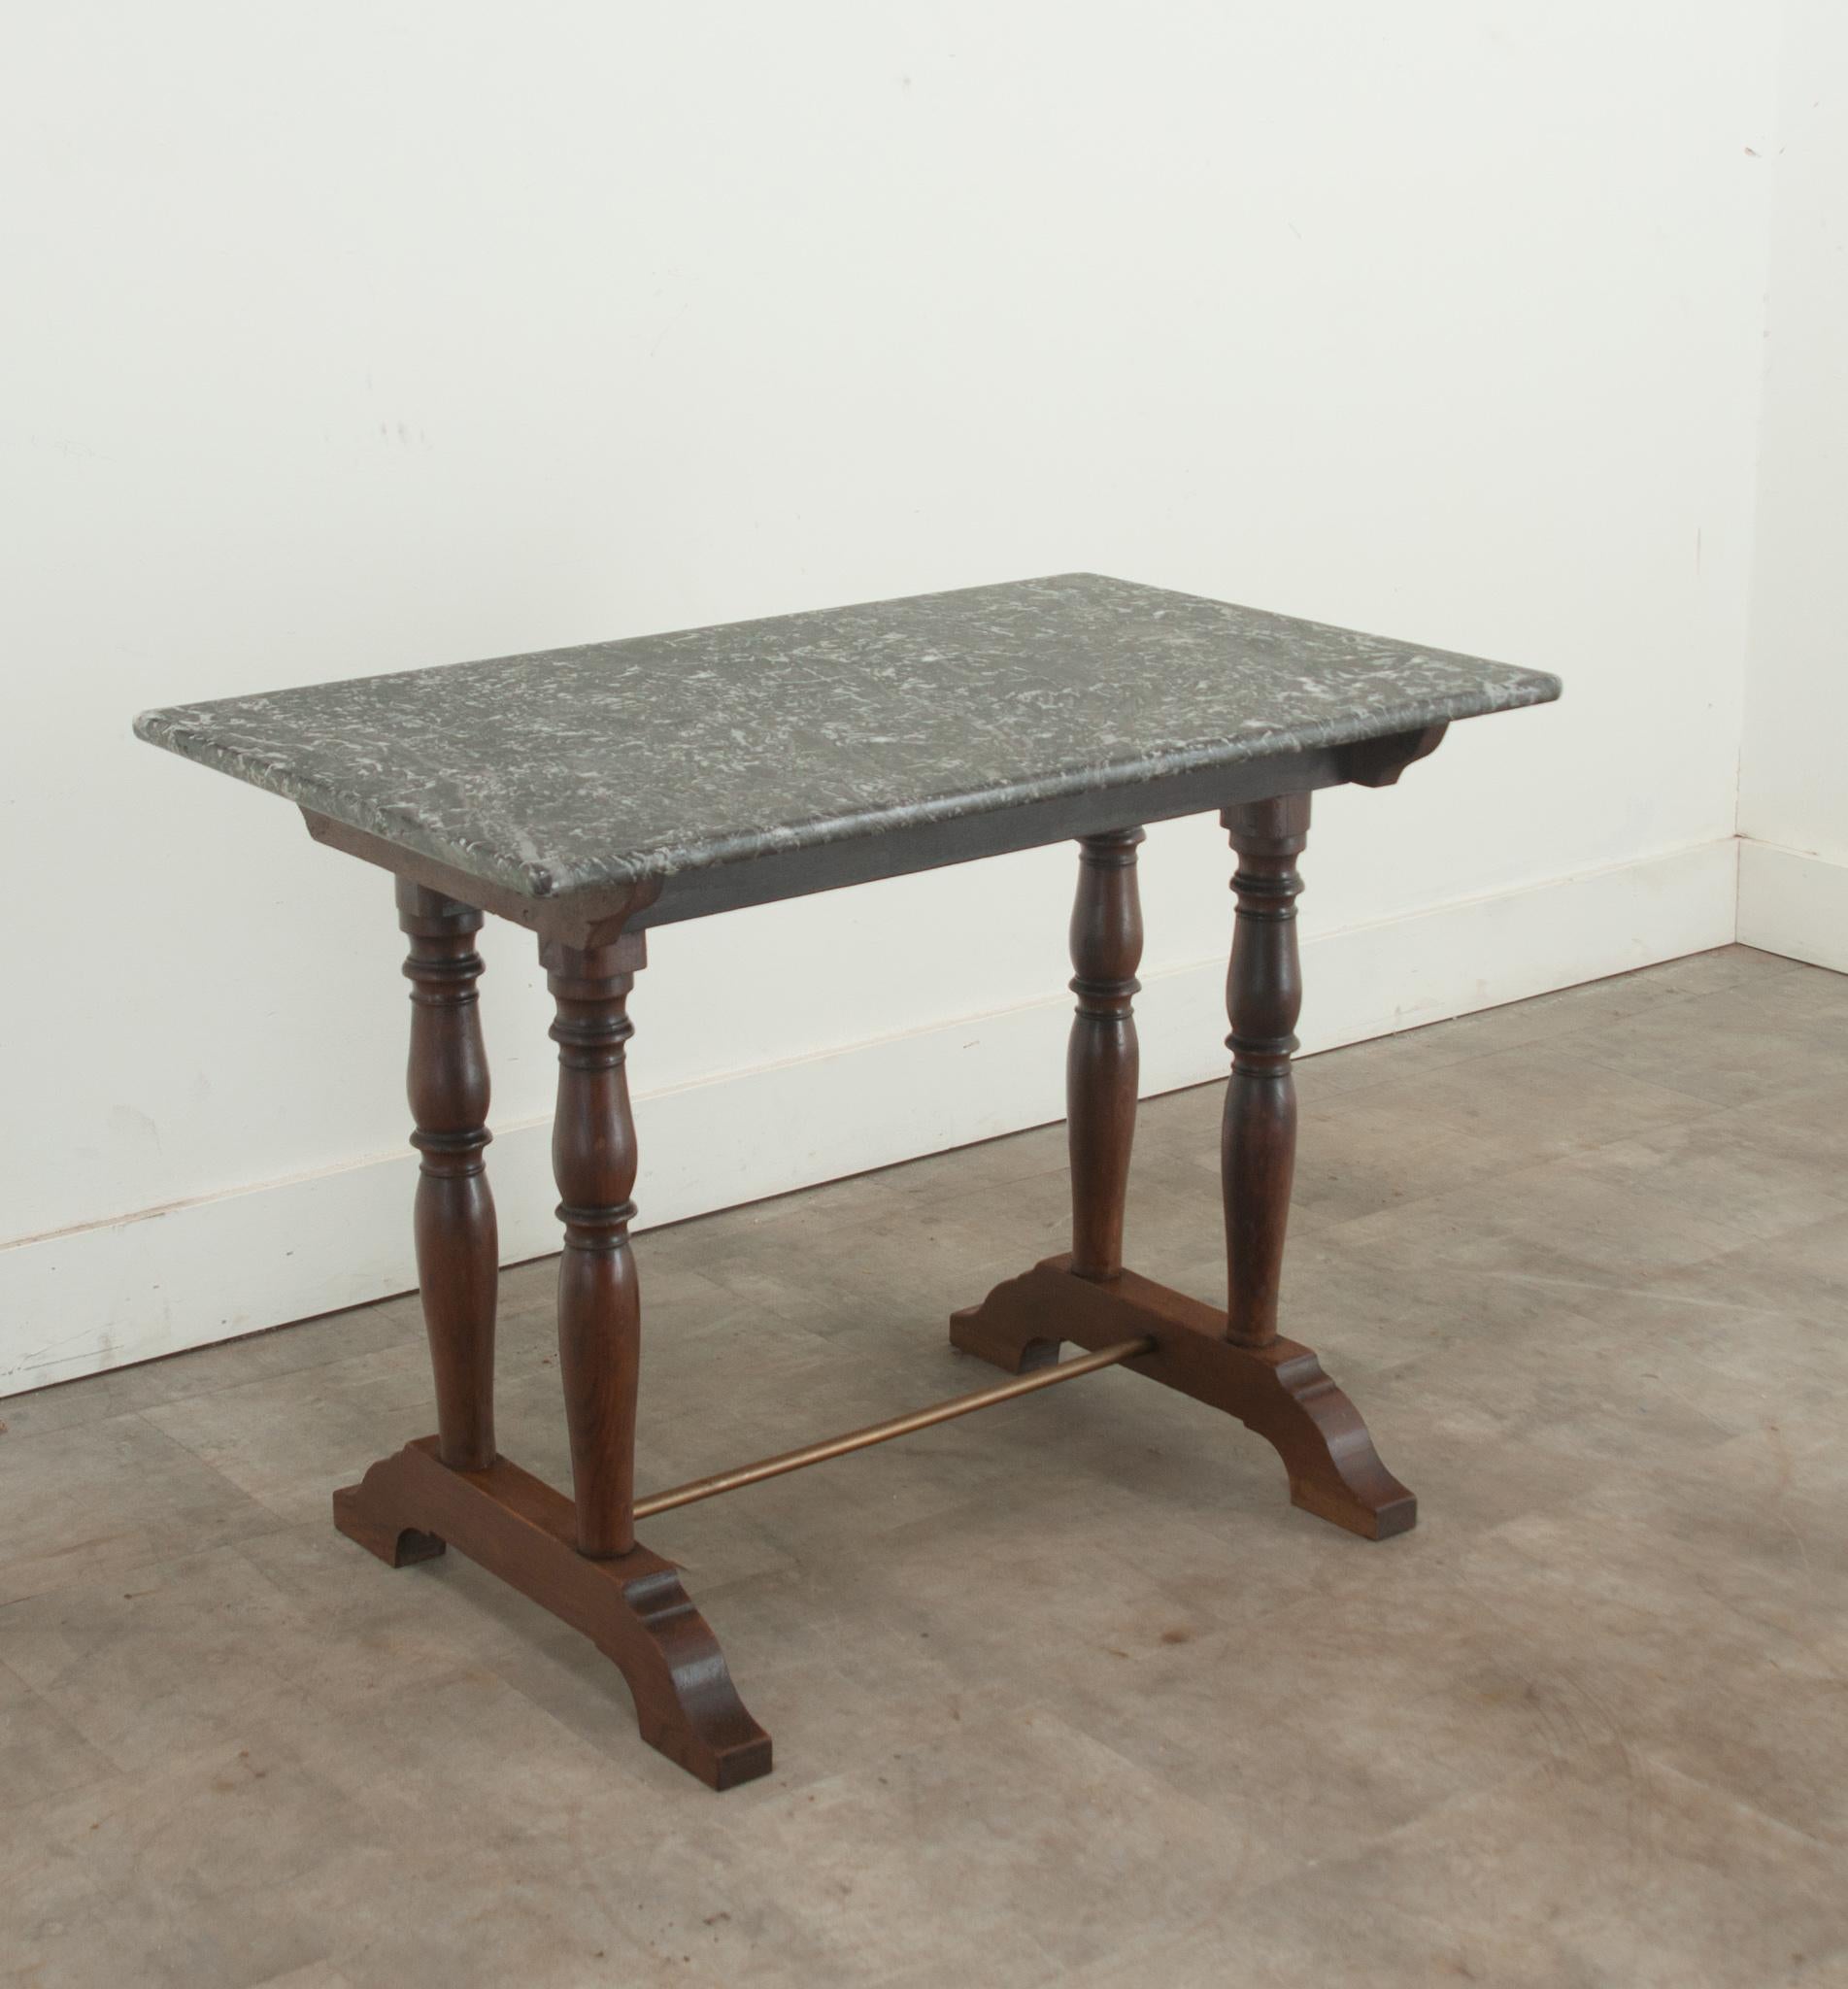 An early 20th Century oak, marble, and brass bistro table. The original St.Anne marble top is beautiful and durable, raised over four turned oak legs over bracket feet and a brass stretcher. Cleaned and polished with a French paste wax this antique